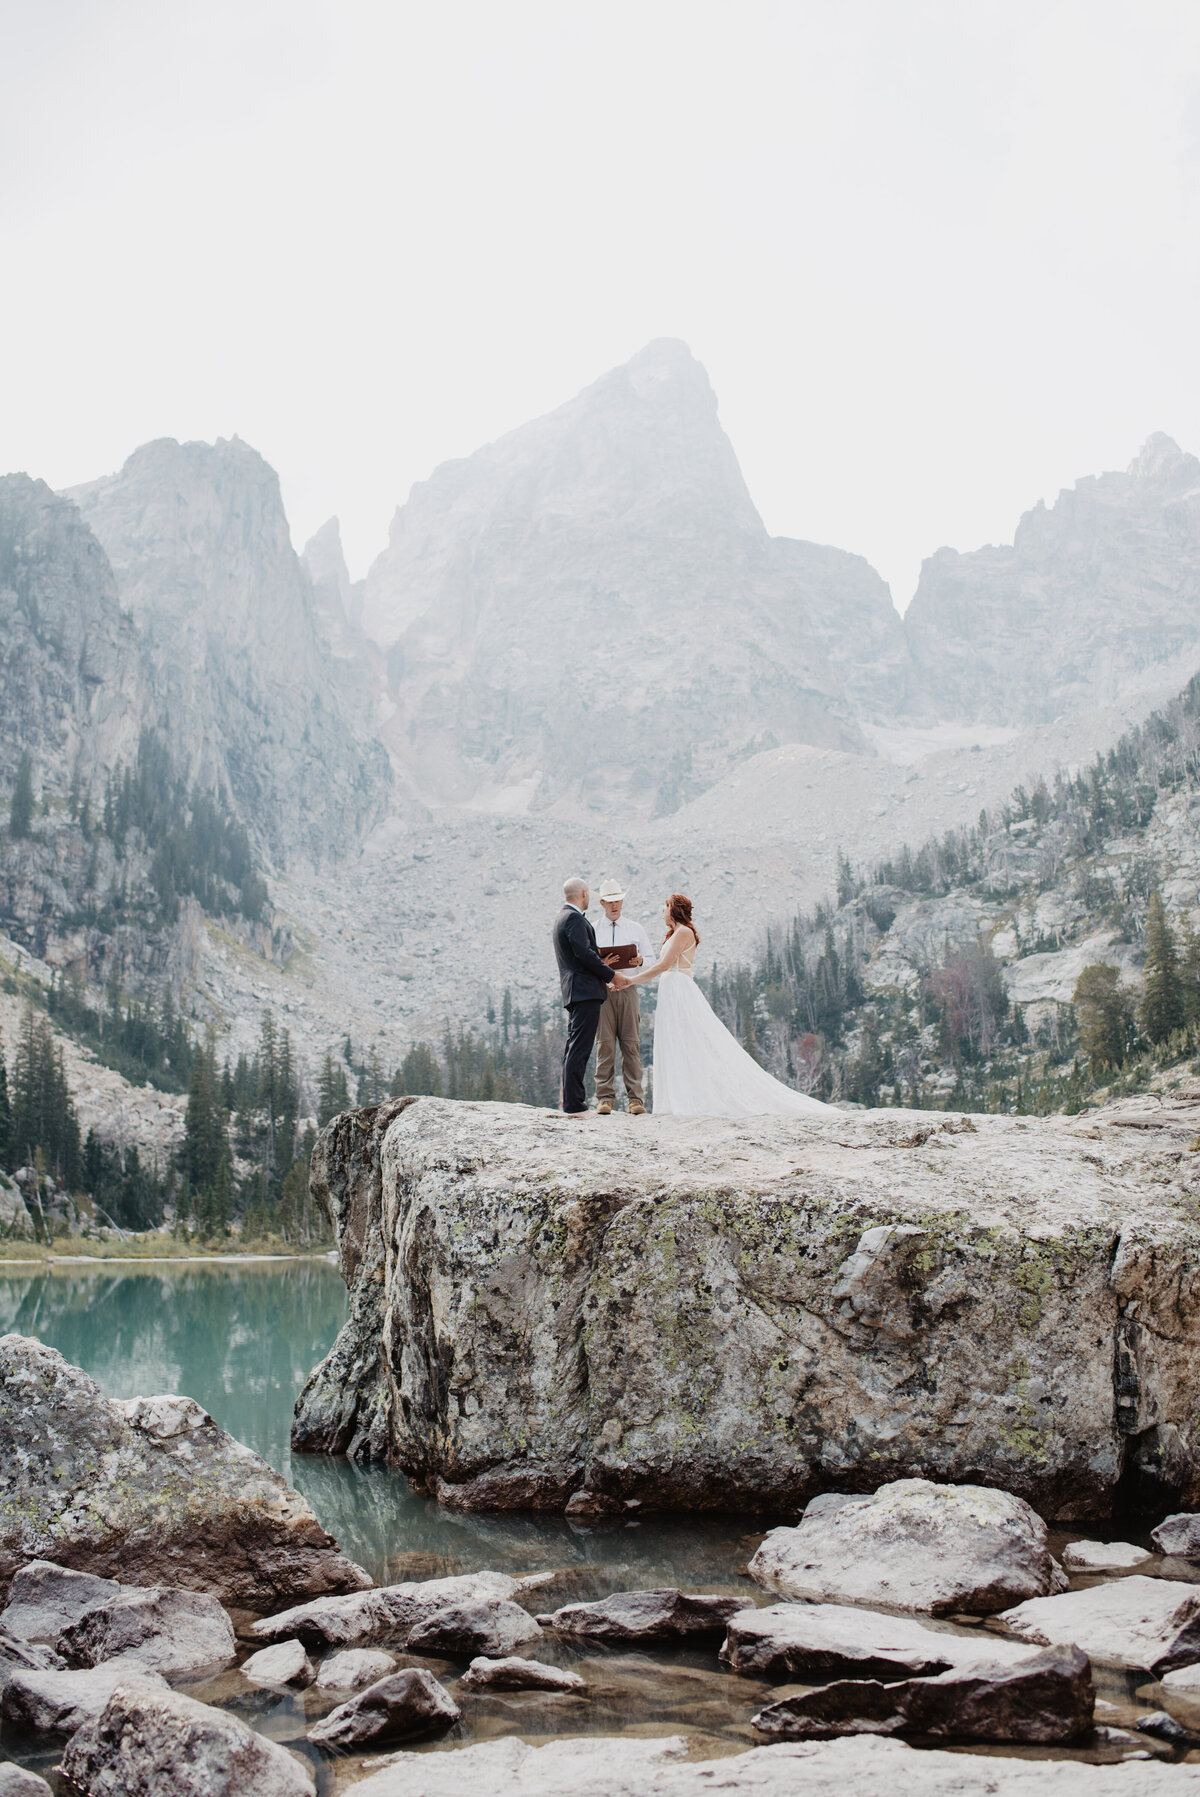 Jackson Hole photographers capture bride and groom holding hands during ceremony